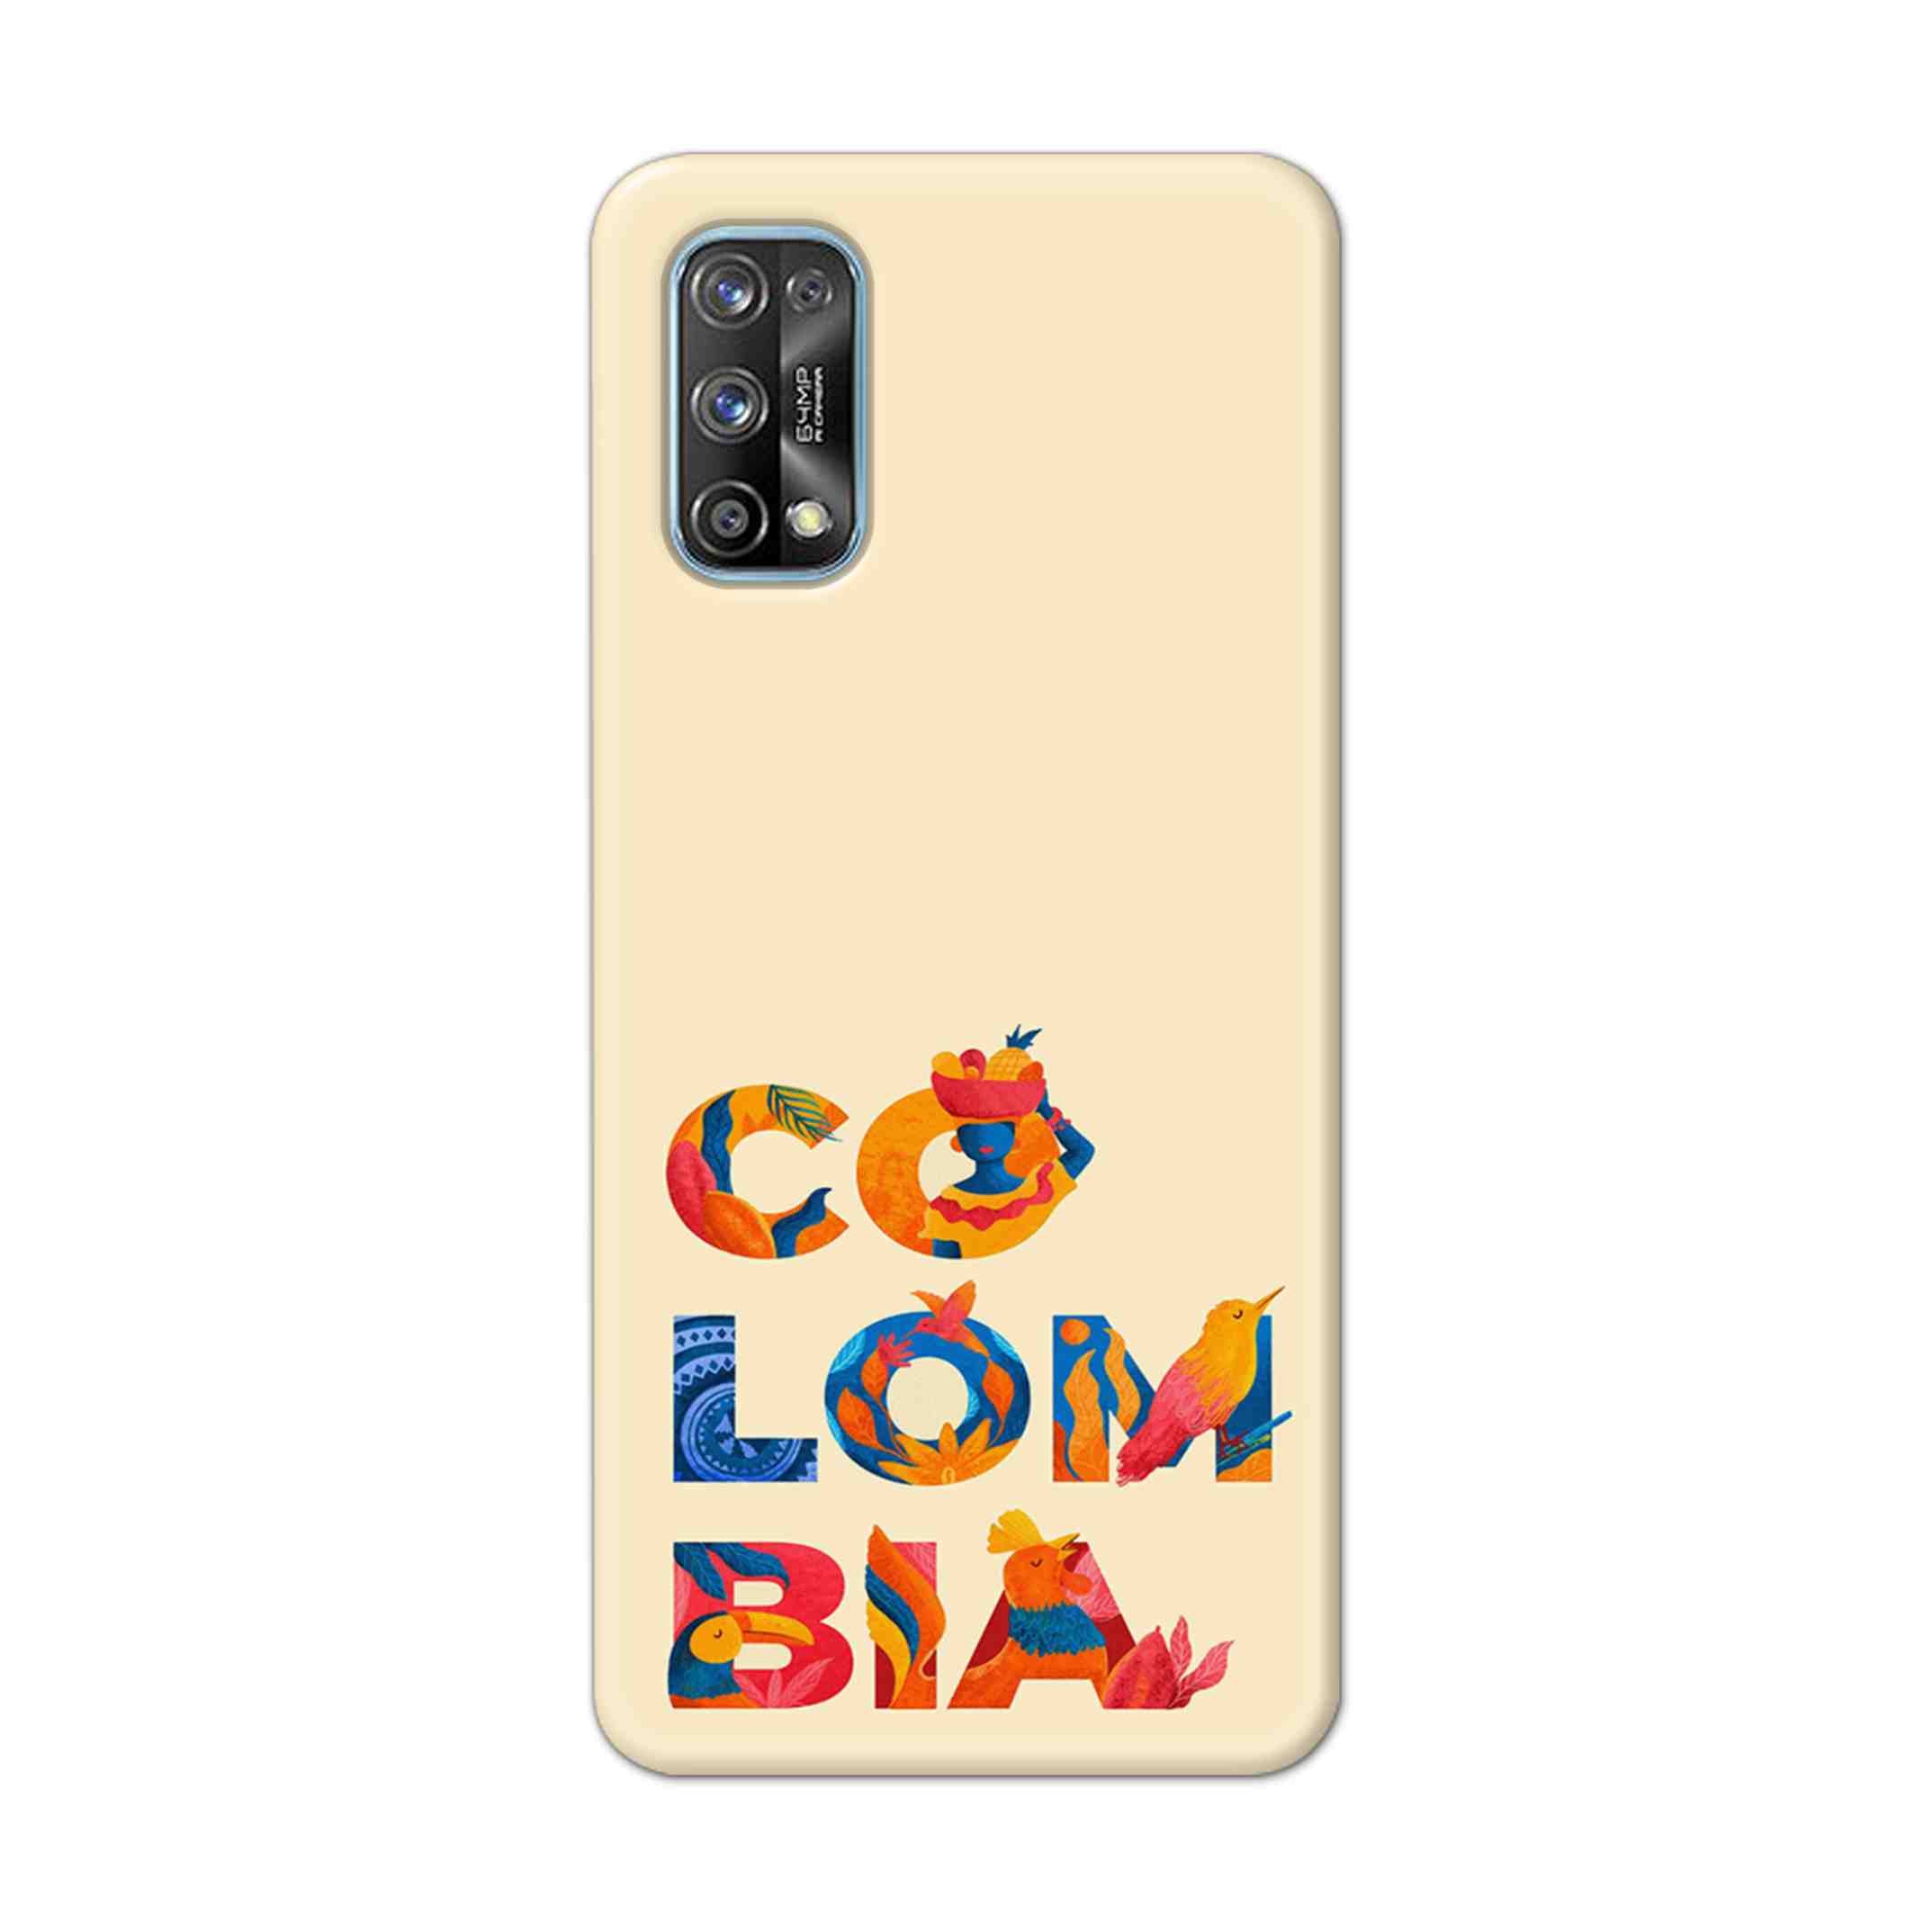 Buy Colombia Hard Back Mobile Phone Case Cover For Realme 7 Pro Online